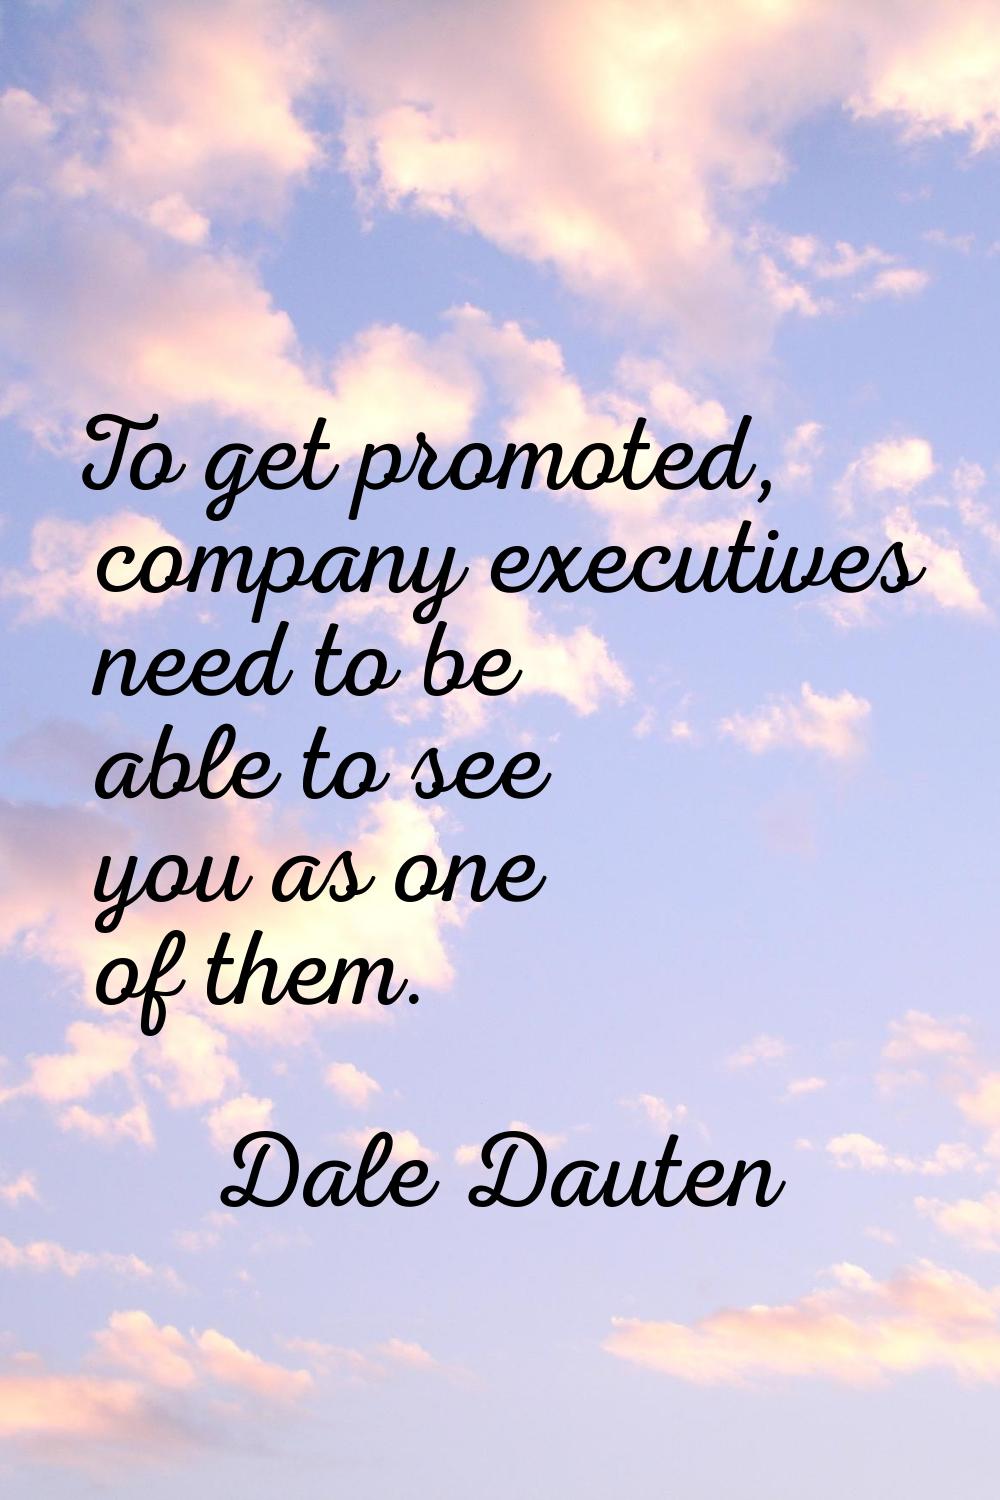 To get promoted, company executives need to be able to see you as one of them.